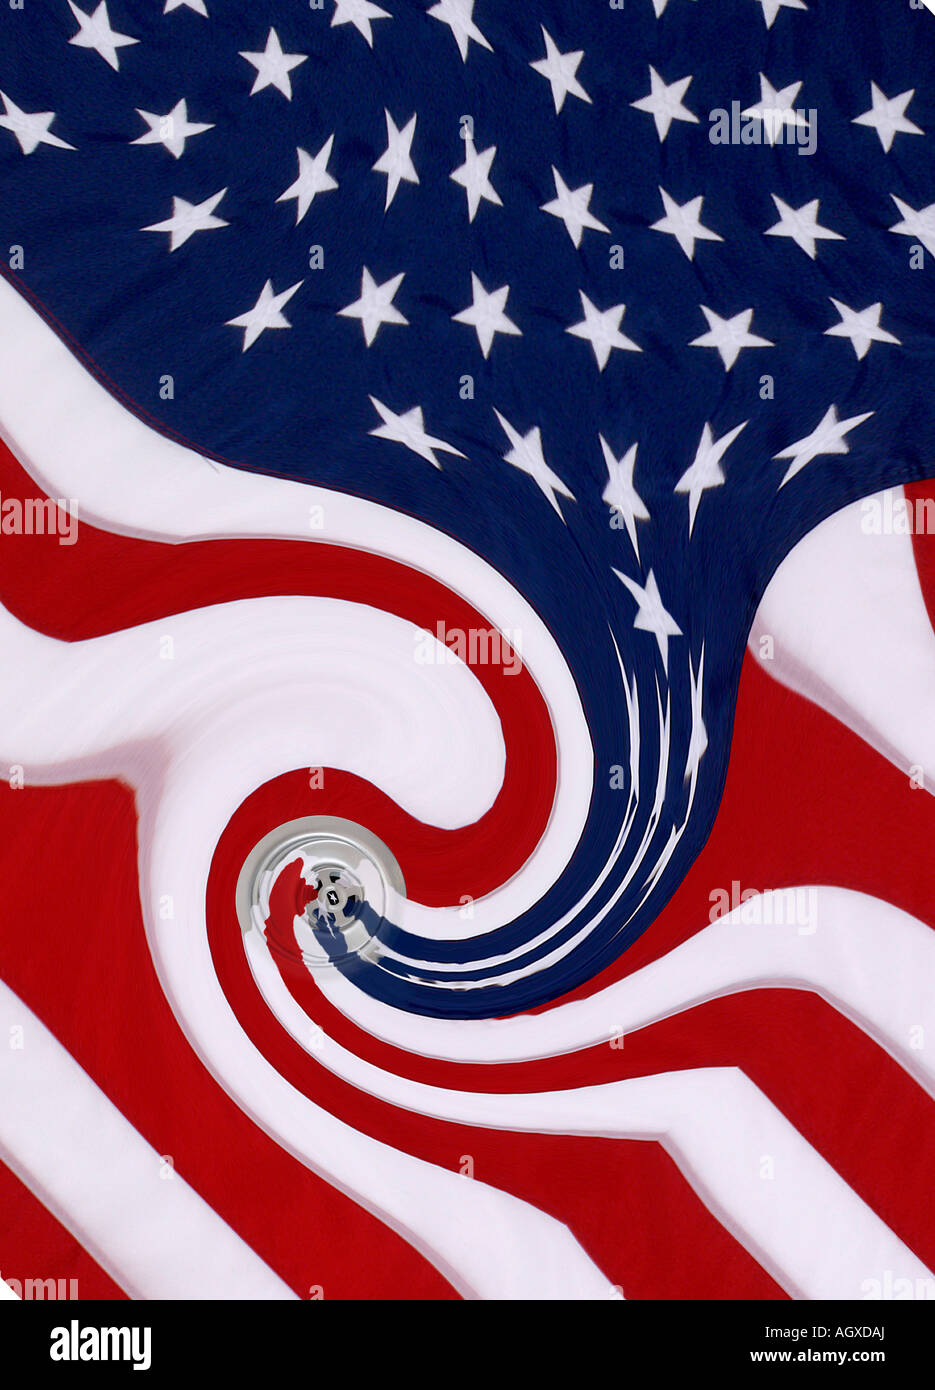 USA Down the Drain?  Photo-Illustration of American flag going down a drain.  Social satire questioning US's position in world Stars and Stripes Stock Photo